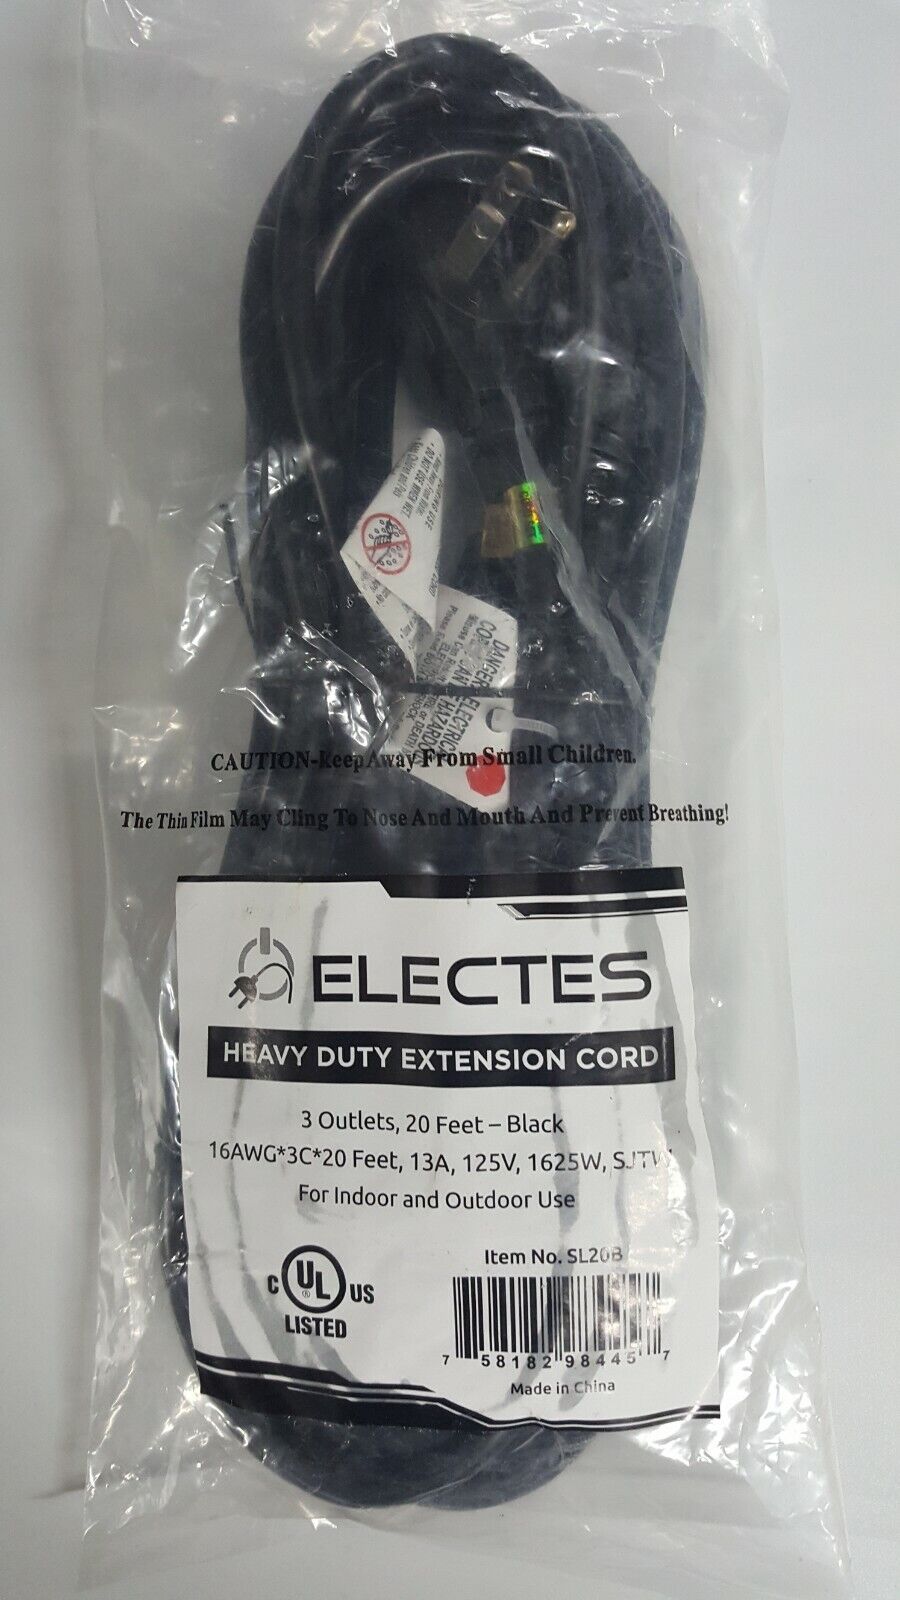 Electes 20 ft Heavy Duty Extension Cord / Wire, 3 Outlets -Black